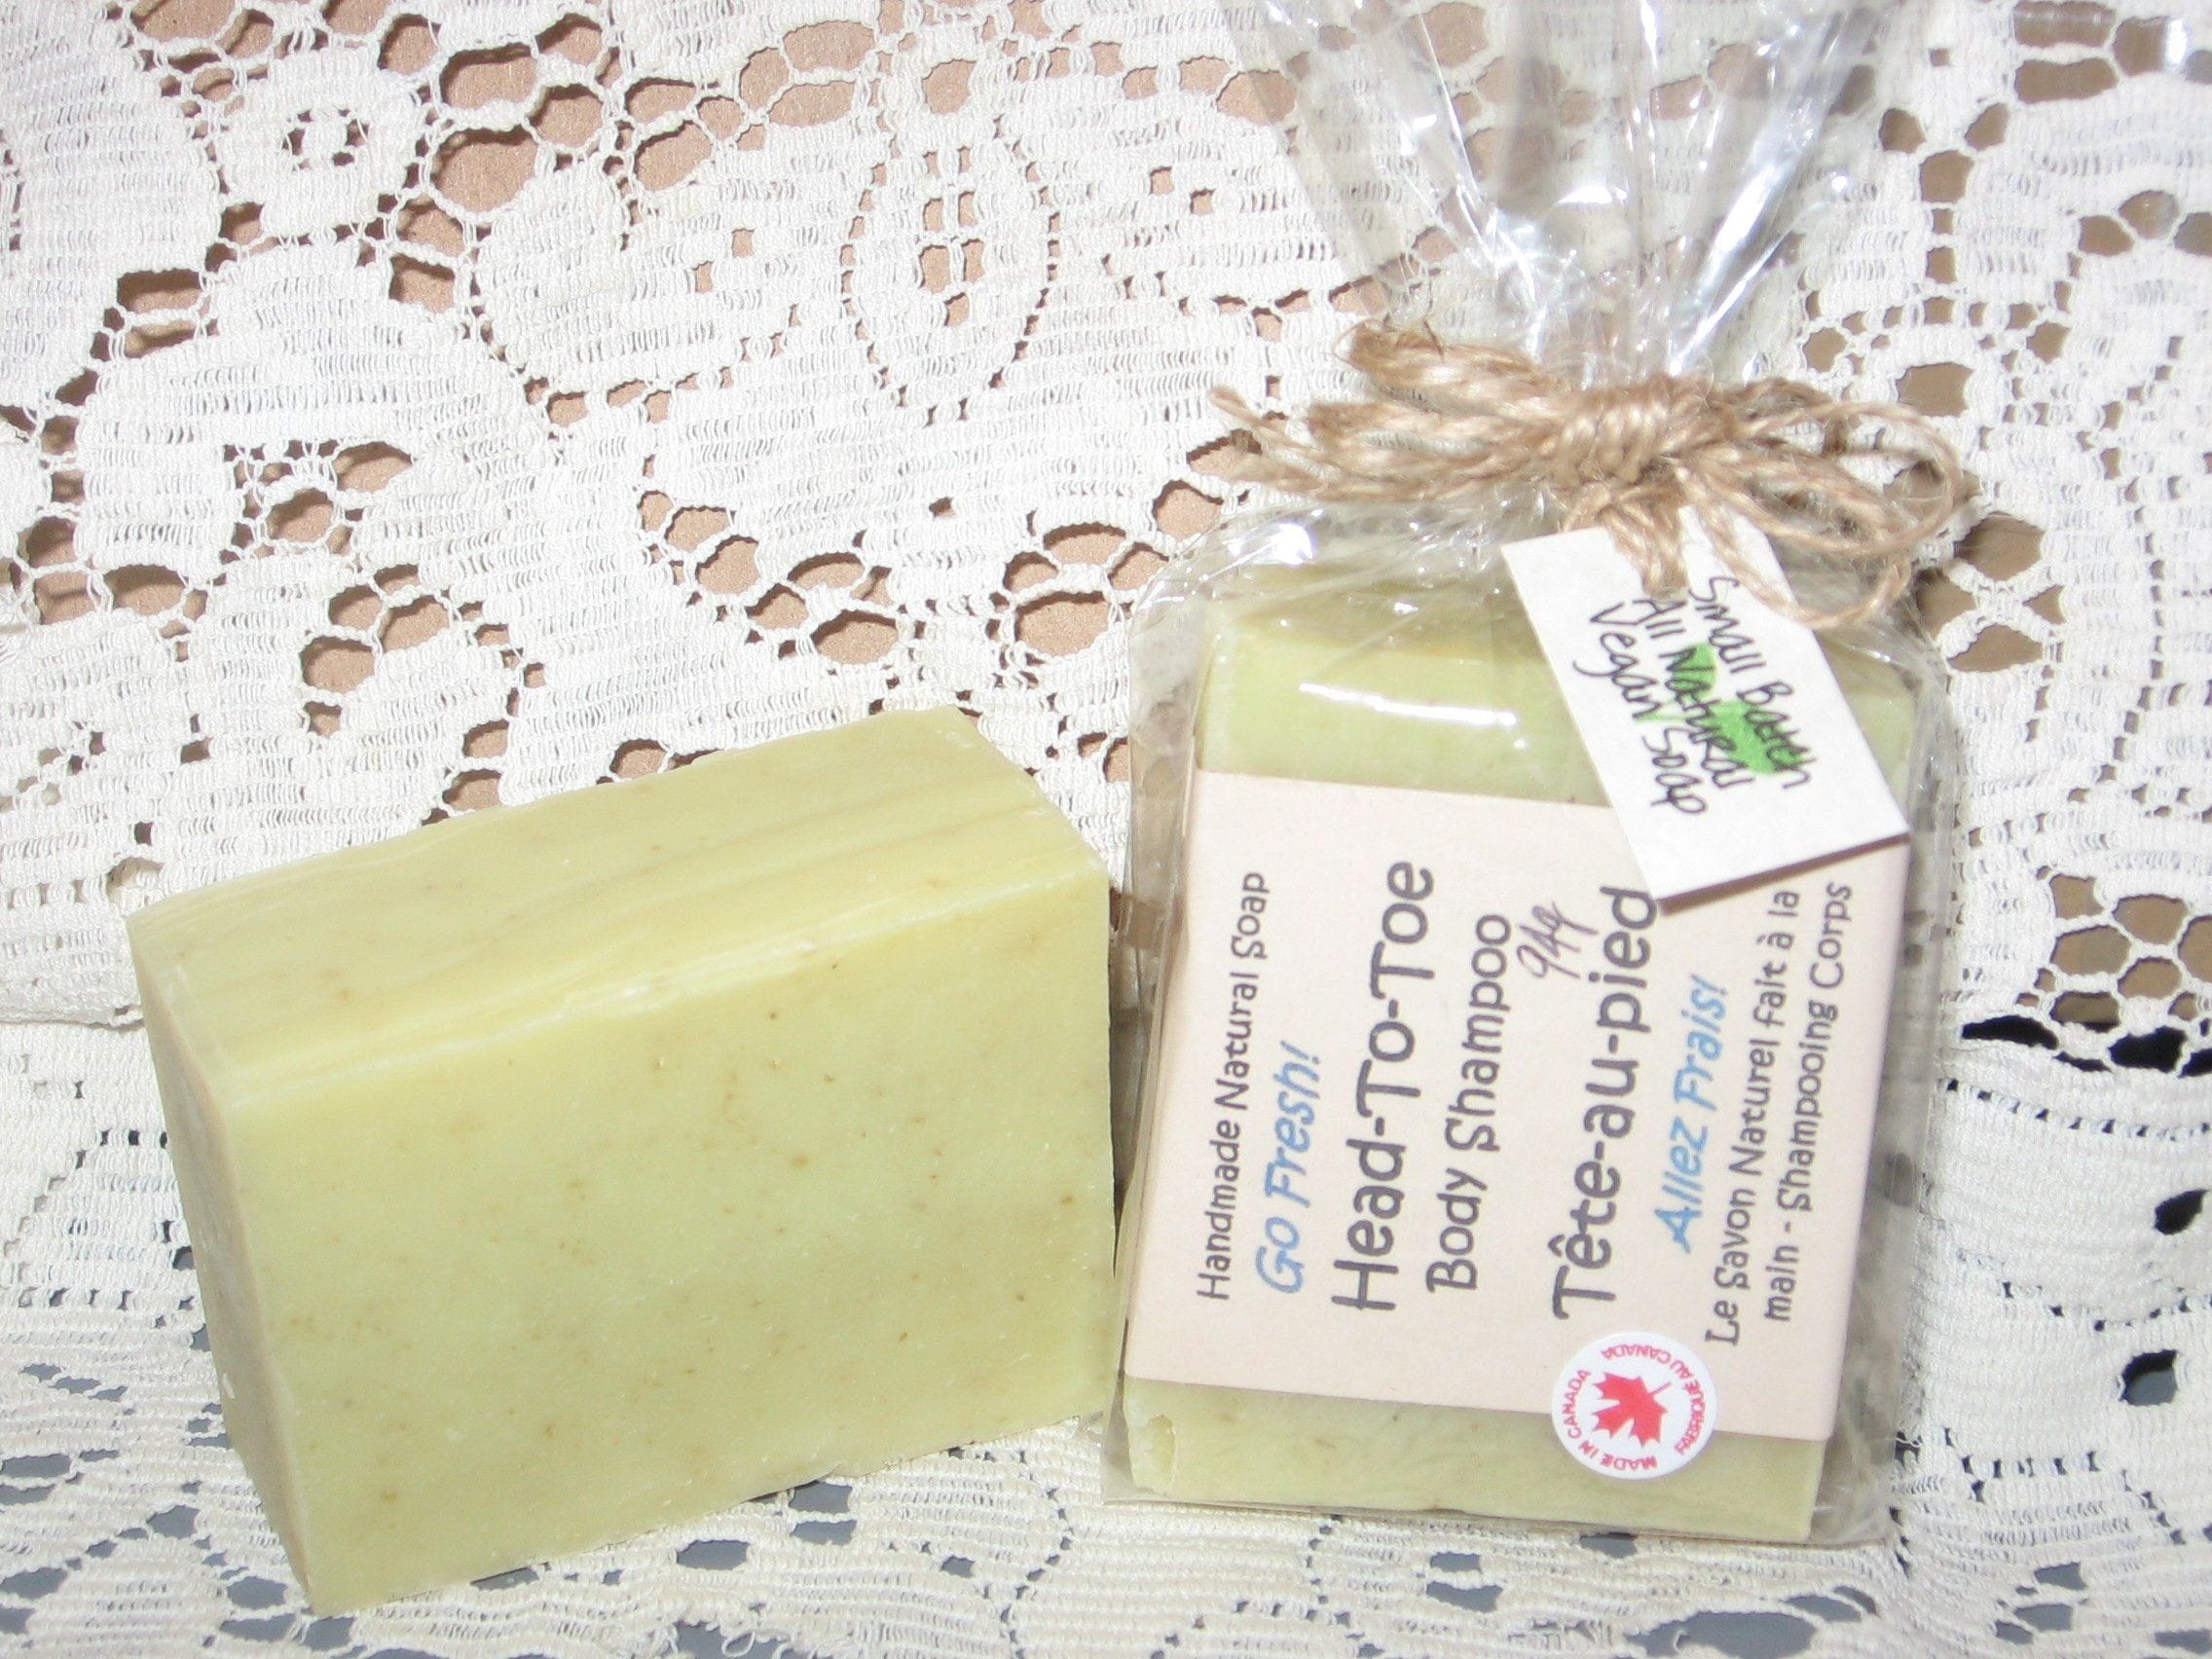 This small batch natural soap bar is bursting with a clean and fresh natural scent and can be used on the hair, face and body. All natural, hand made vegan soap